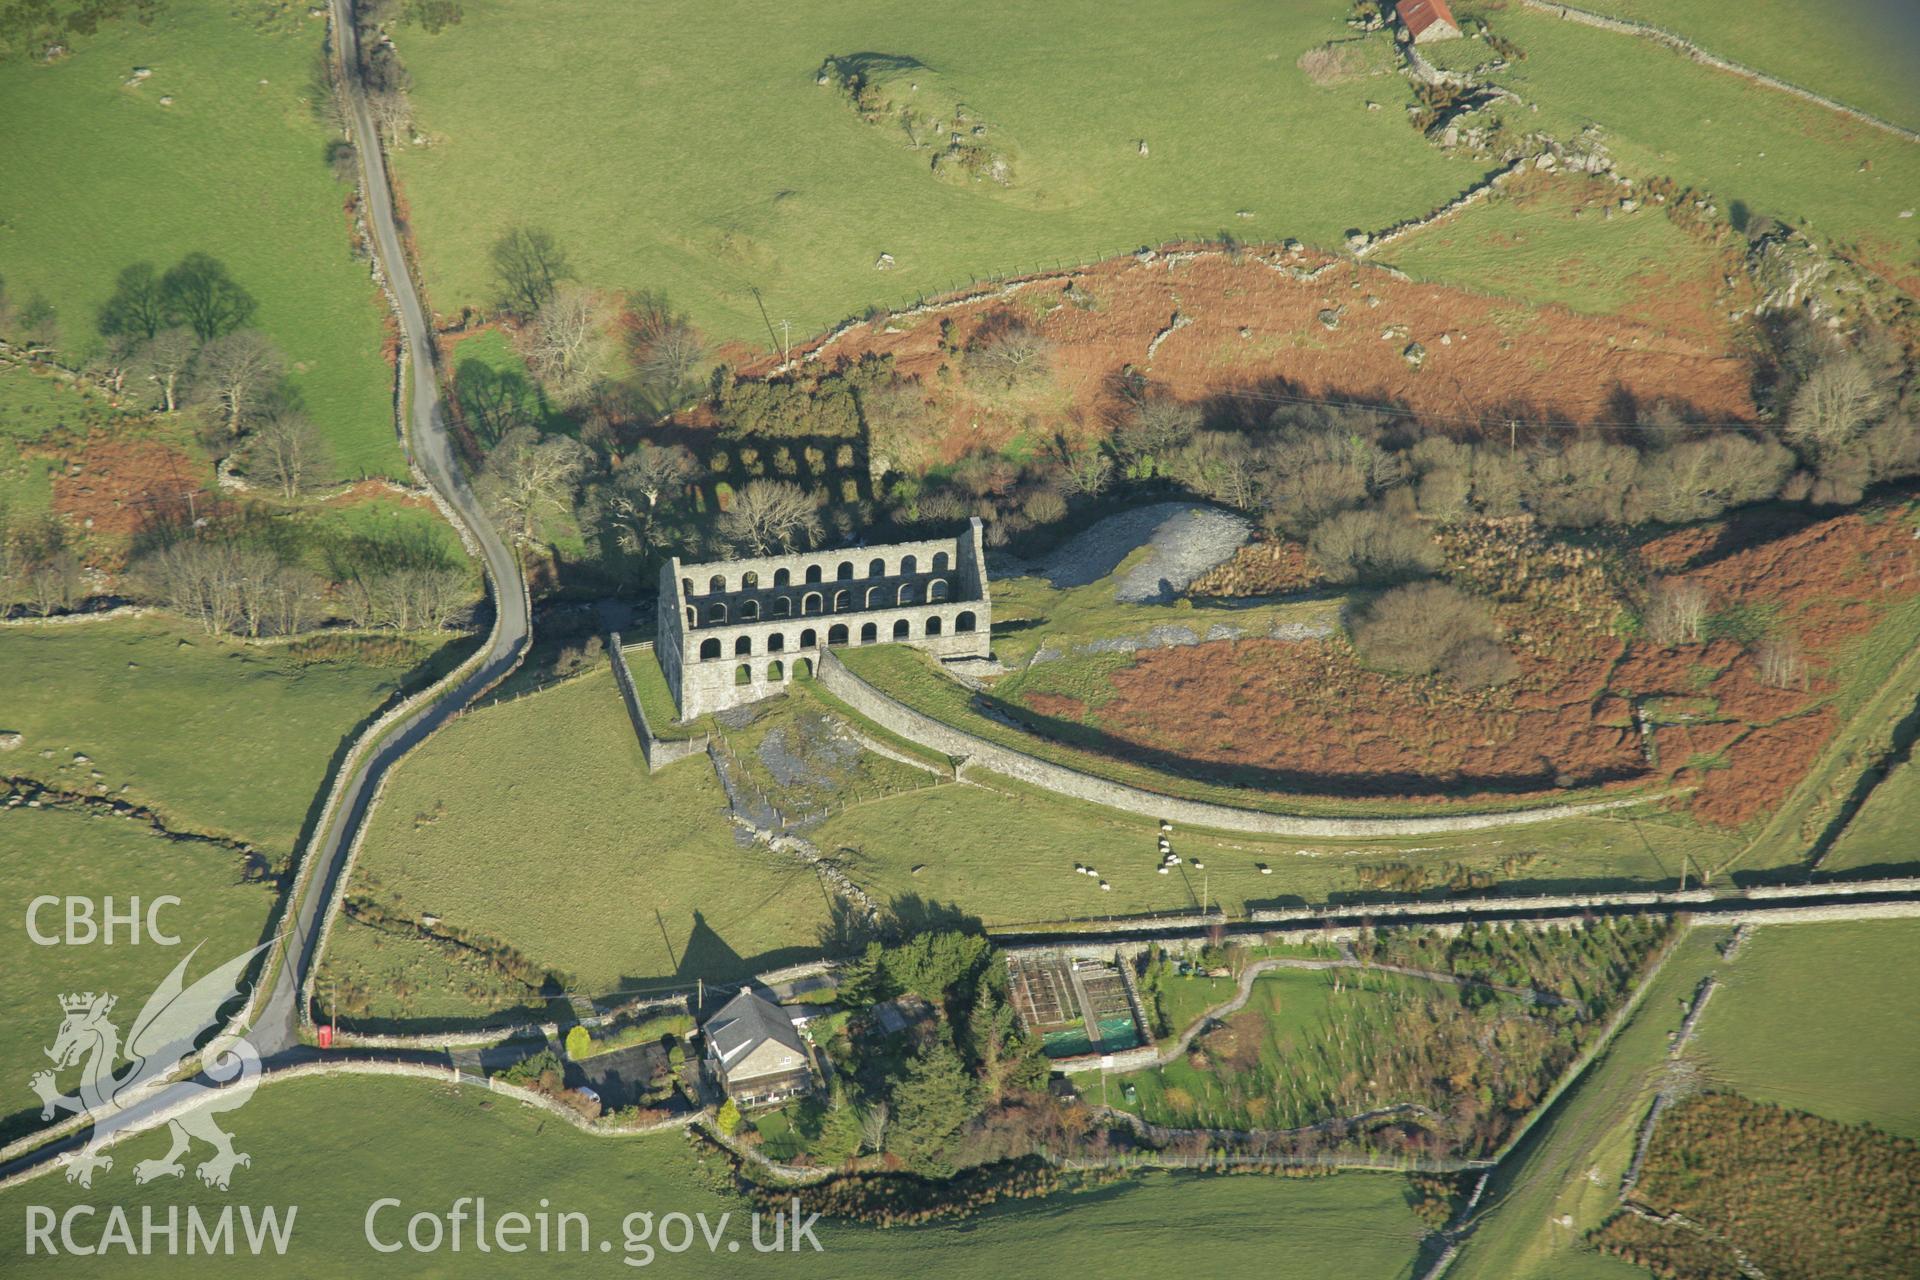 RCAHMW colour oblique aerial photograph of Ynys-y-Pandy Slate Mill, Cwmystradllyn. Taken on 25 January 2007 by Toby Driver